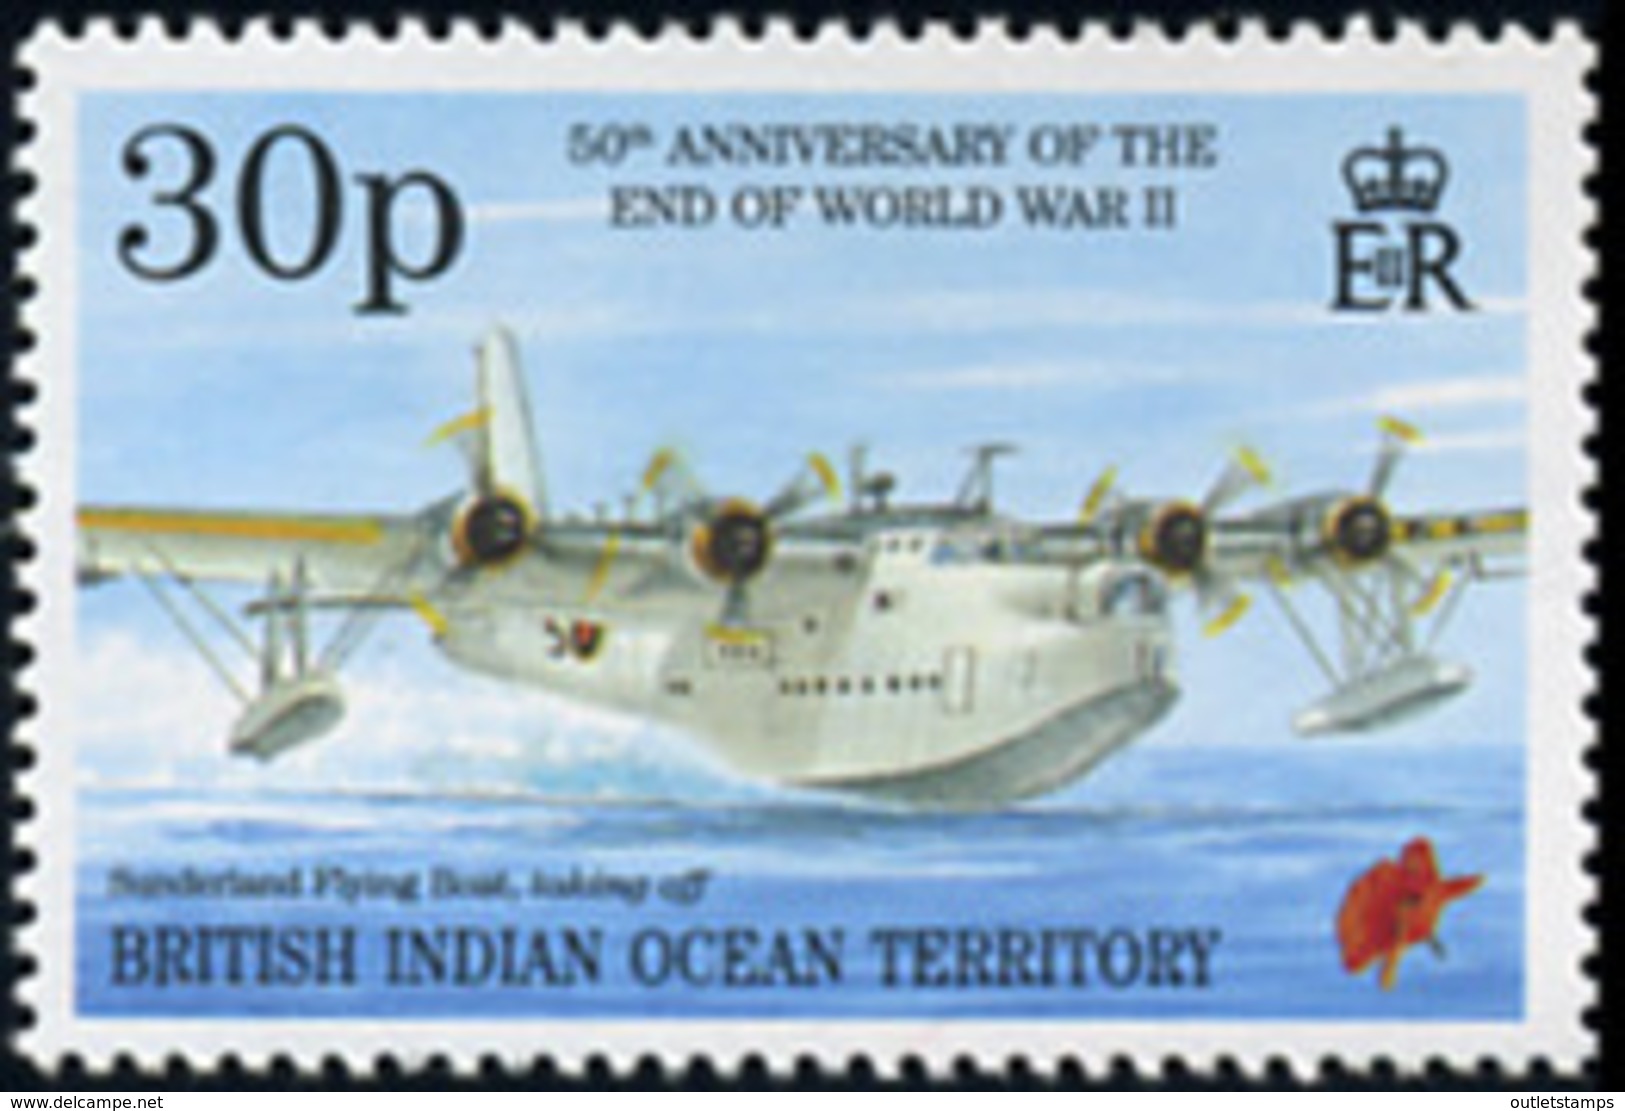 Ref. 599713 * NEW *  - BRITISH INDIAN OCEAN TERRITORY . 1995. 50th ANNIVERSARY OF THE END OF THE SECOND WORLD WAR. 50 AN - Territorio Británico Del Océano Índico